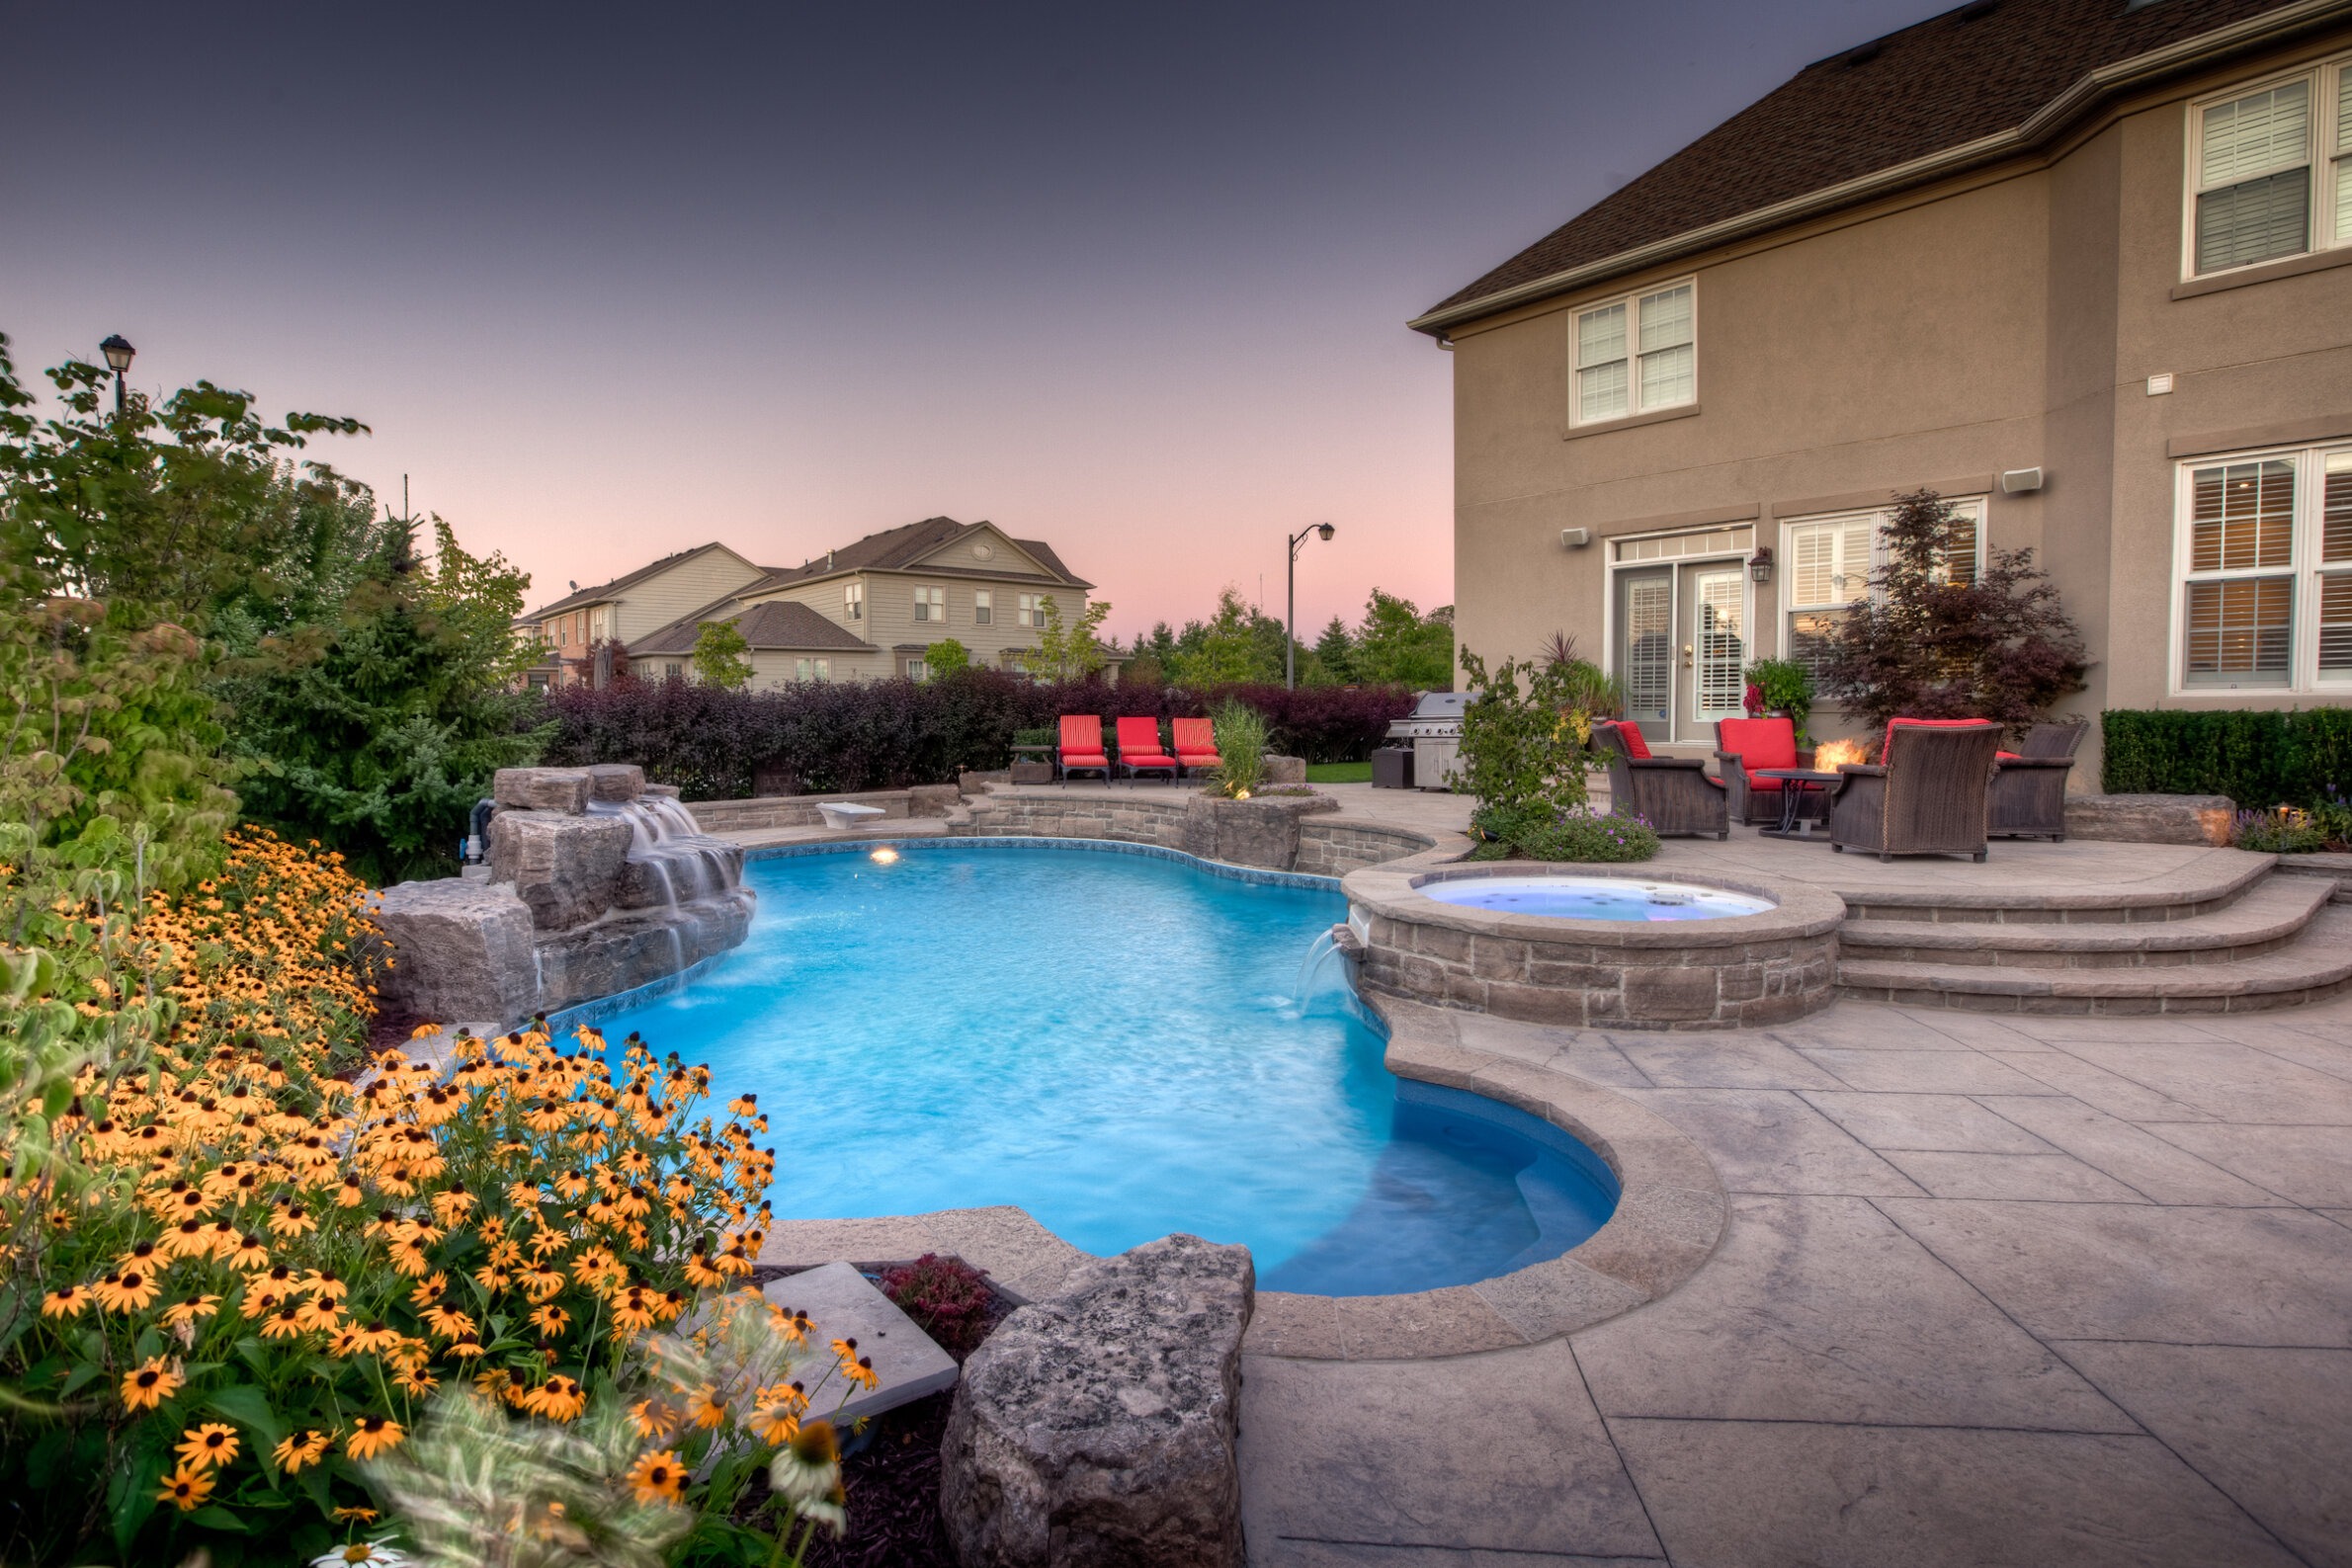 A serene backyard at dusk with an inviting swimming pool, hot tub, waterfall feature, flowering plants, and a cozy seating area with a fire pit.